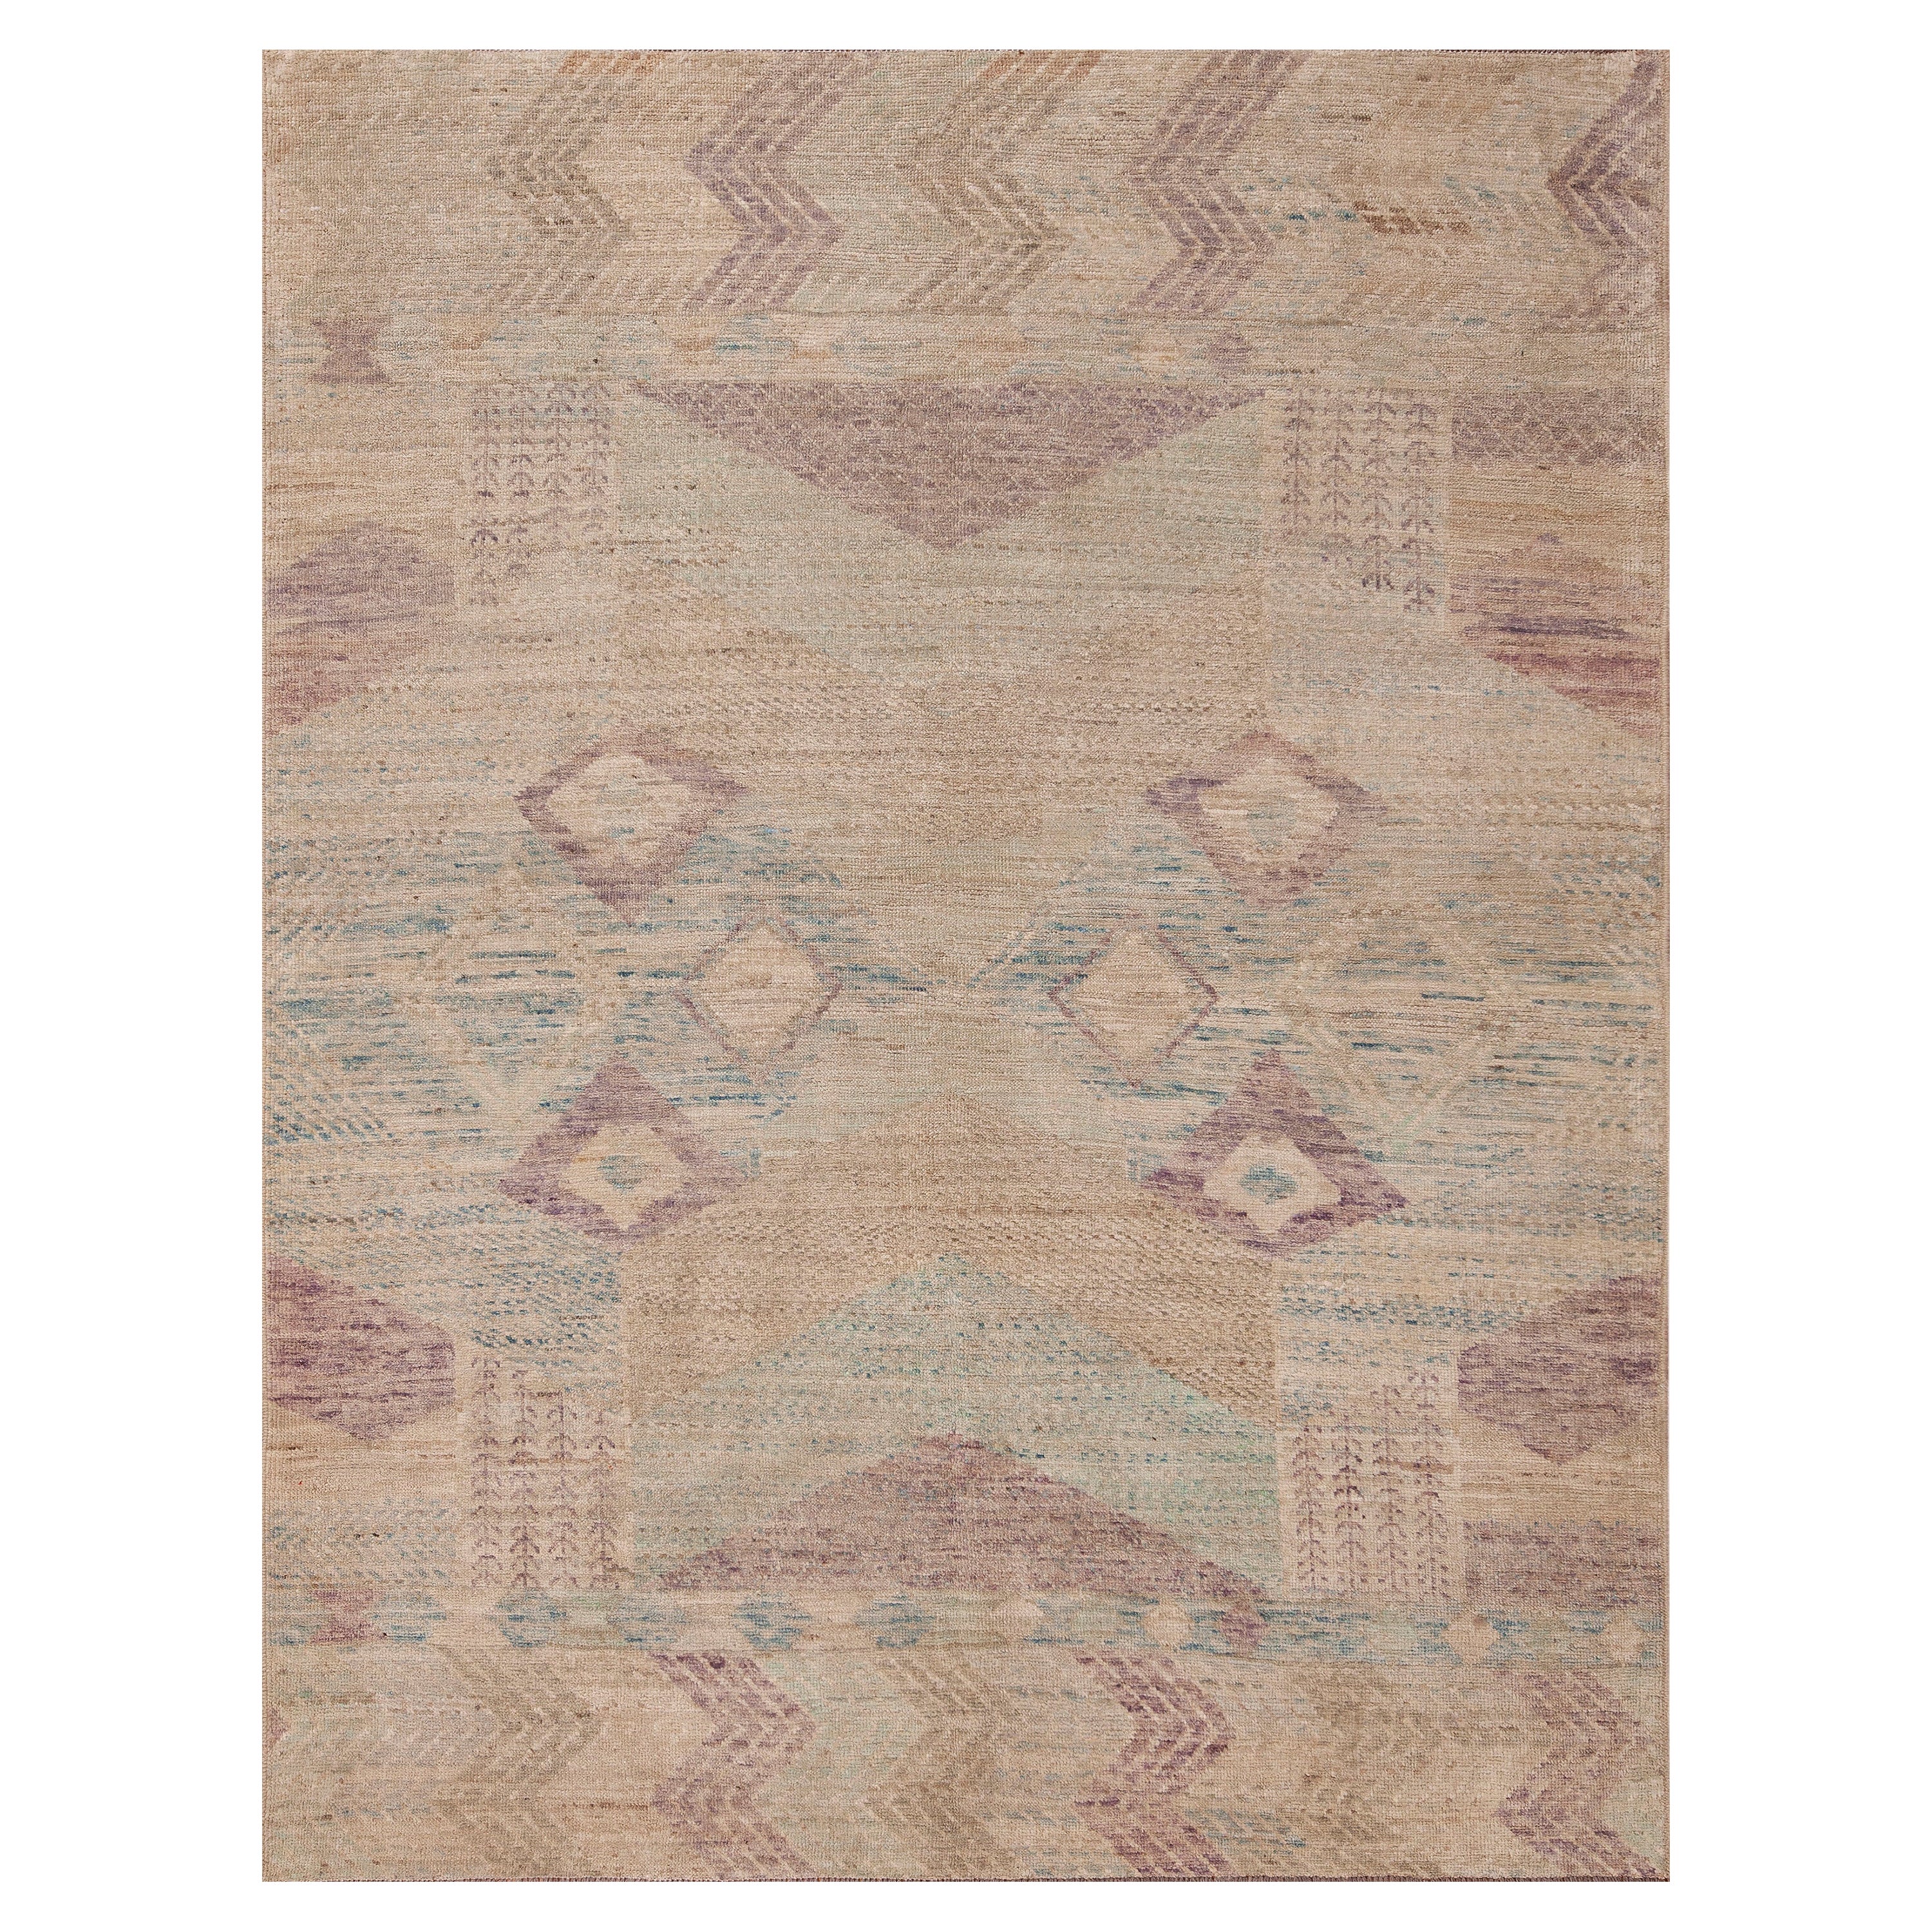 Collection Nazmiyal Collection Soft Color Nomadic Design Modern Wool Area Rug 6'1" x 7'8" (en anglais)